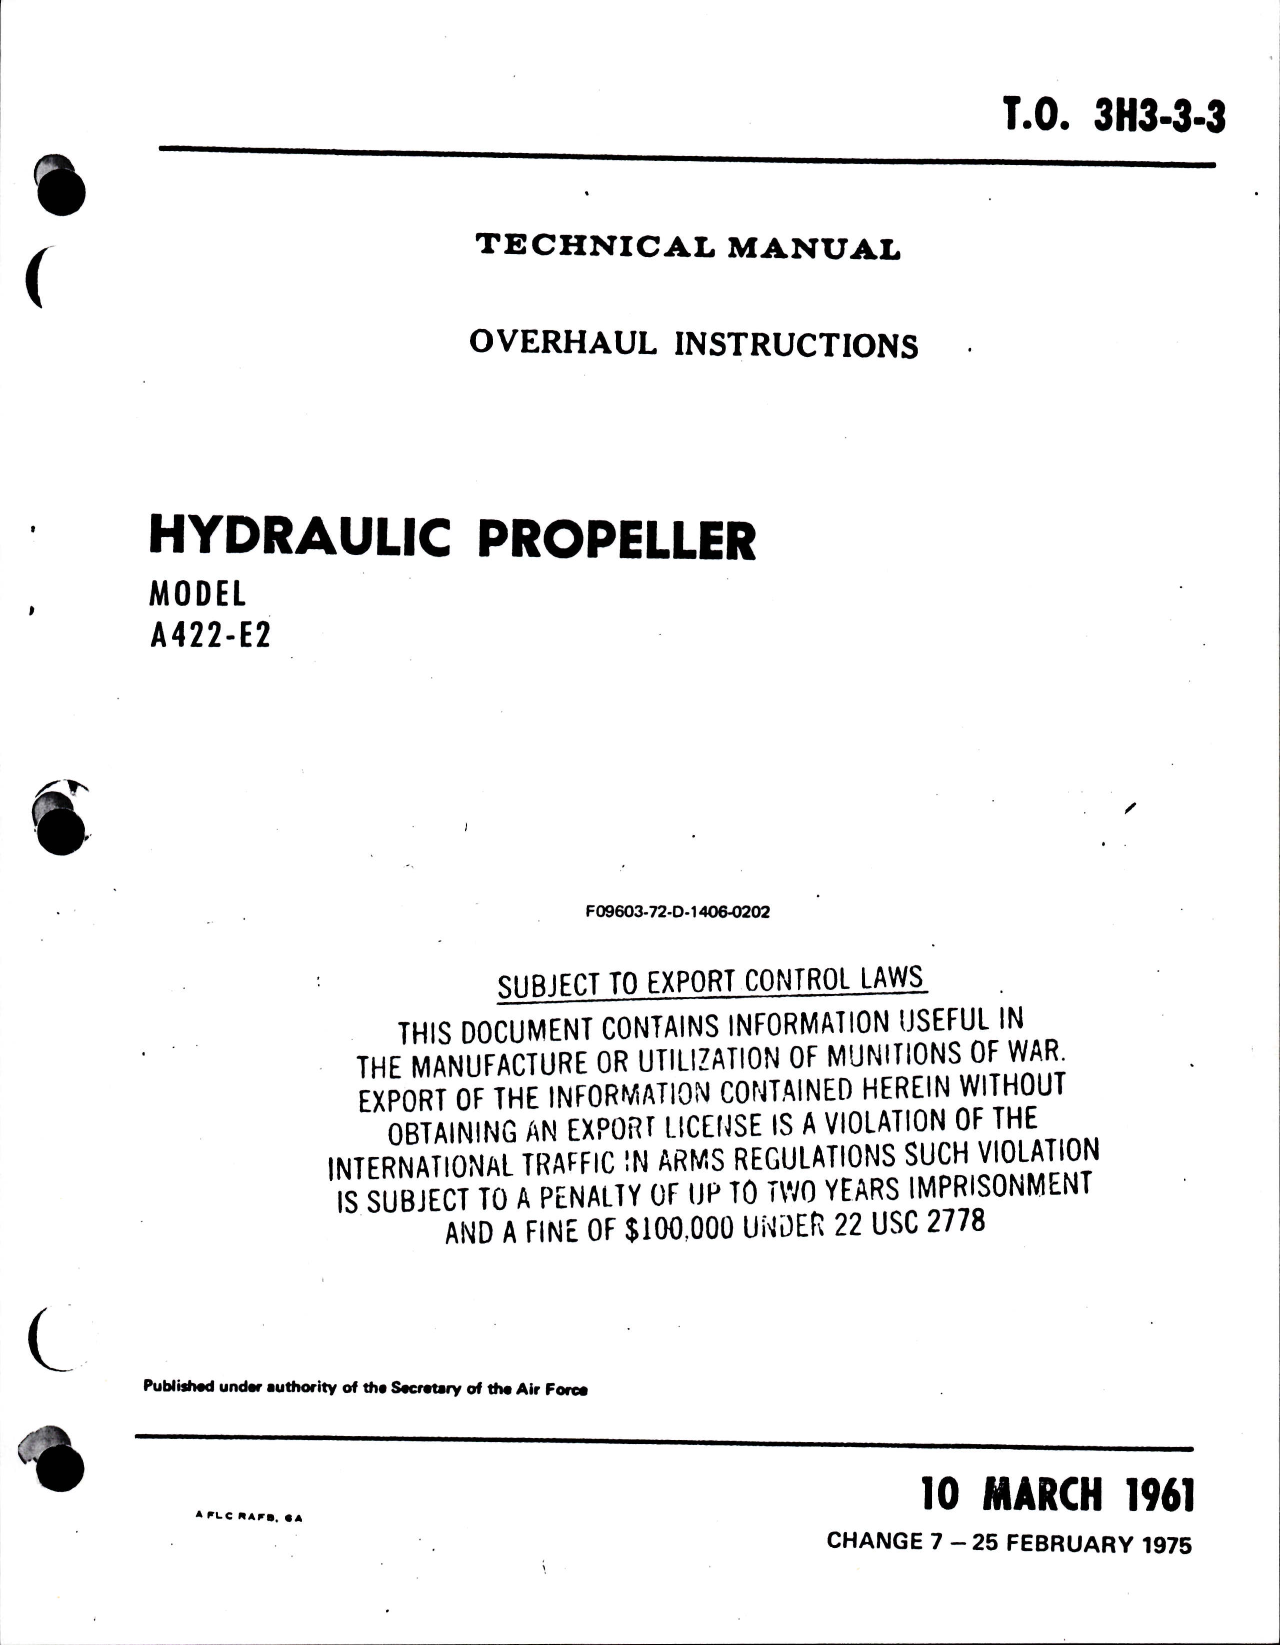 Sample page 1 from AirCorps Library document: Overhaul Instructions for Hydraulic Propeller Model A422-E2